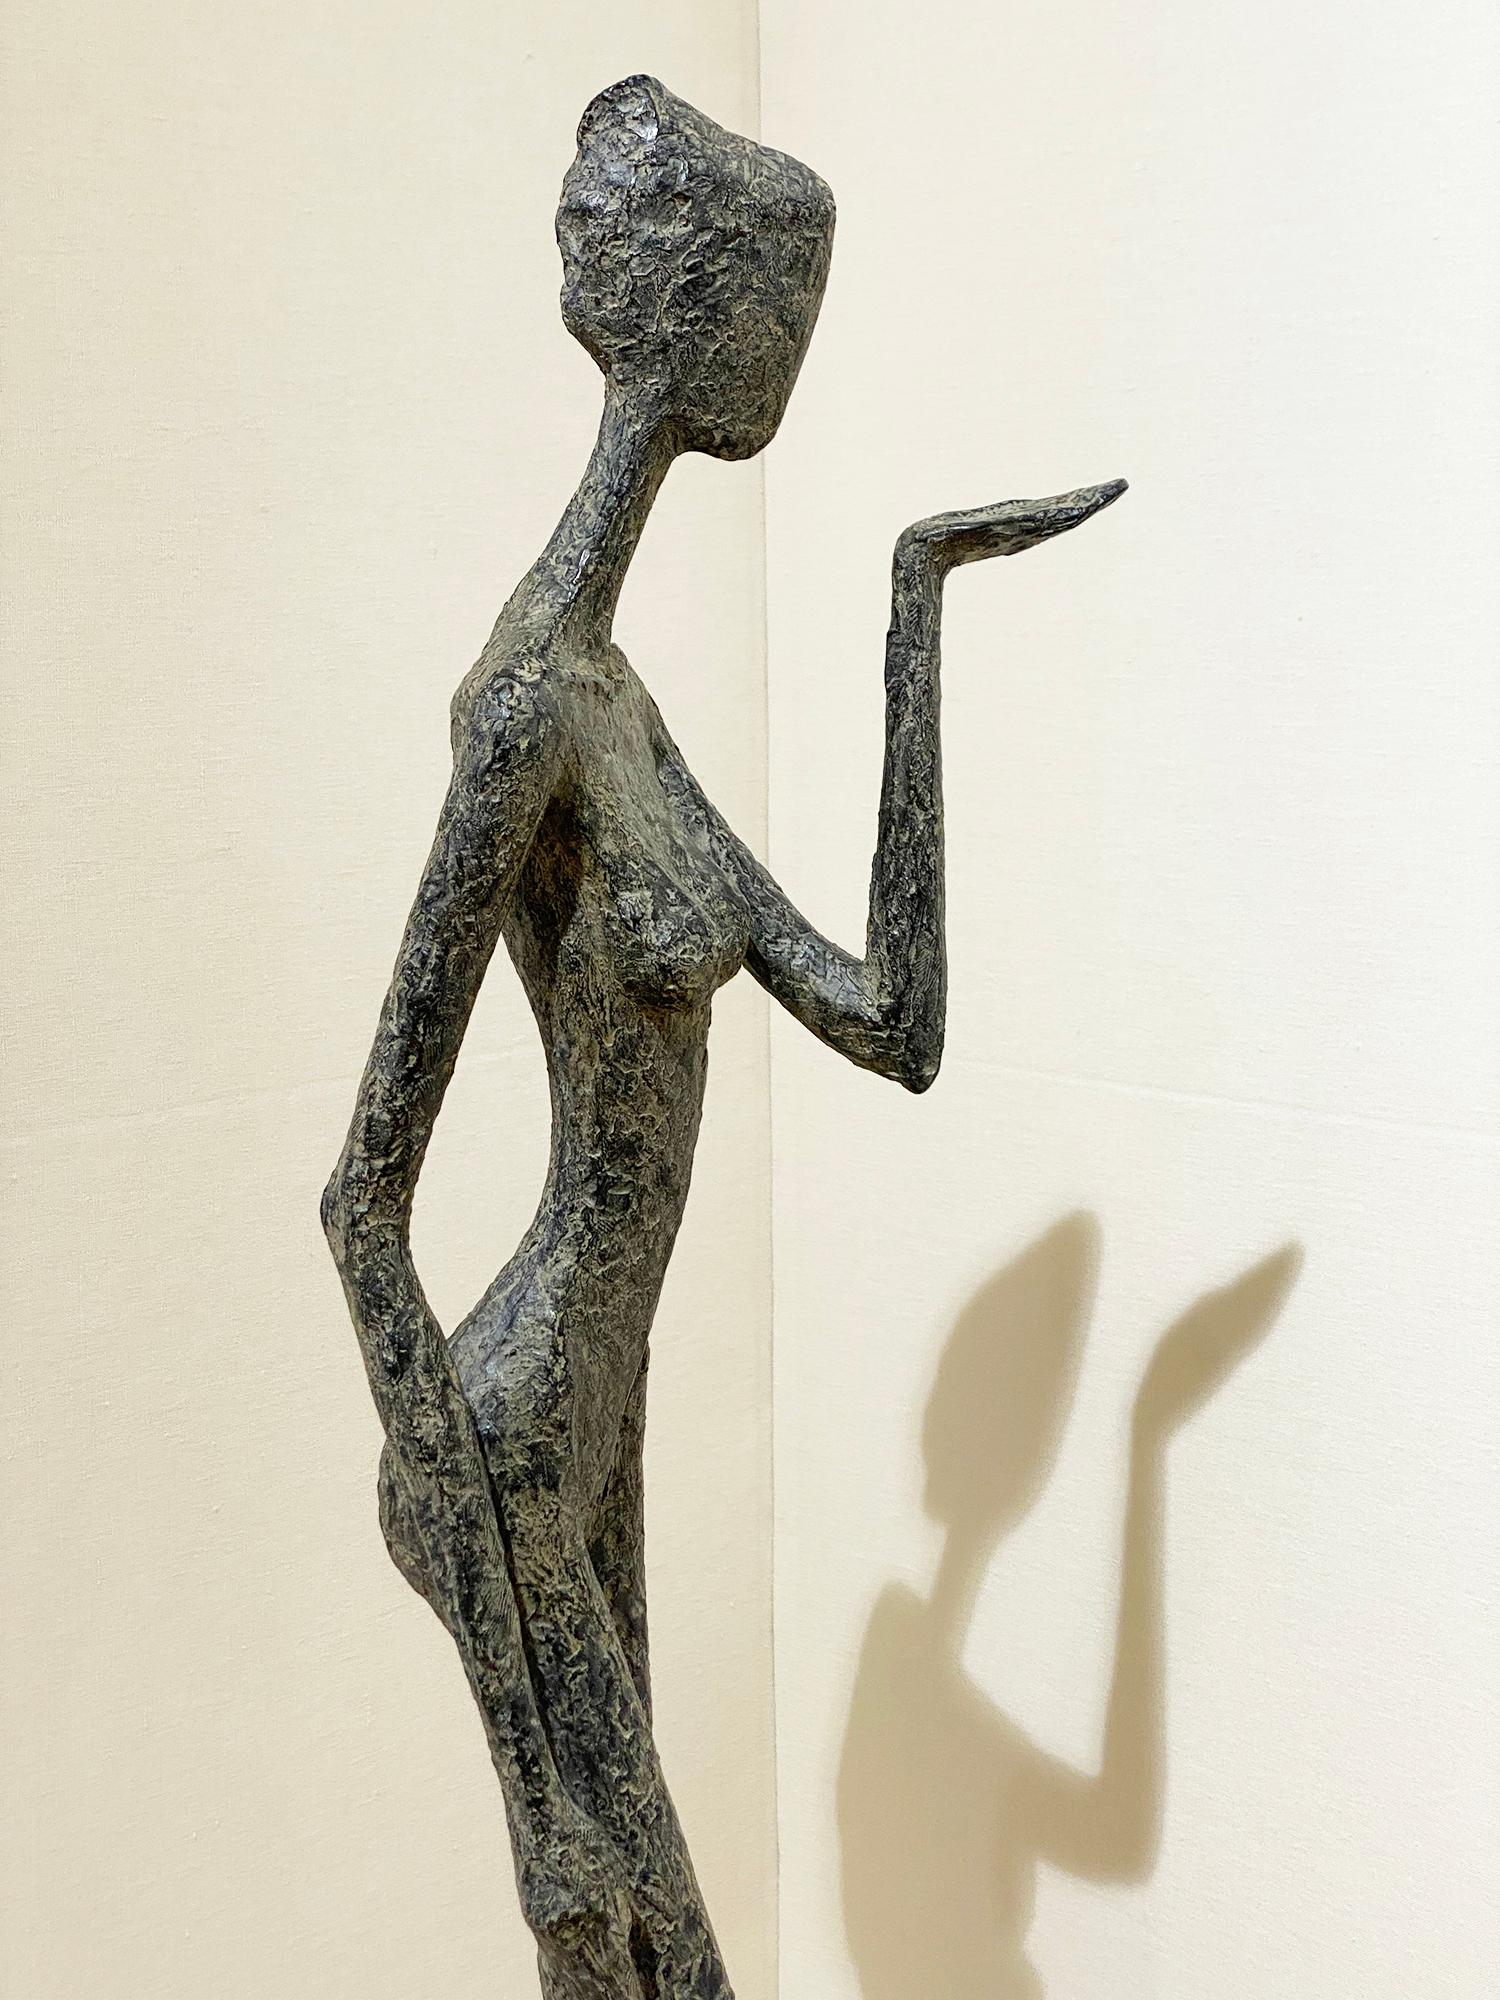  Sentiment figurative nude bronze woman blowing kiss Giacometti style S. Mangaud - Contemporary Sculpture by Sylvie Mangaud